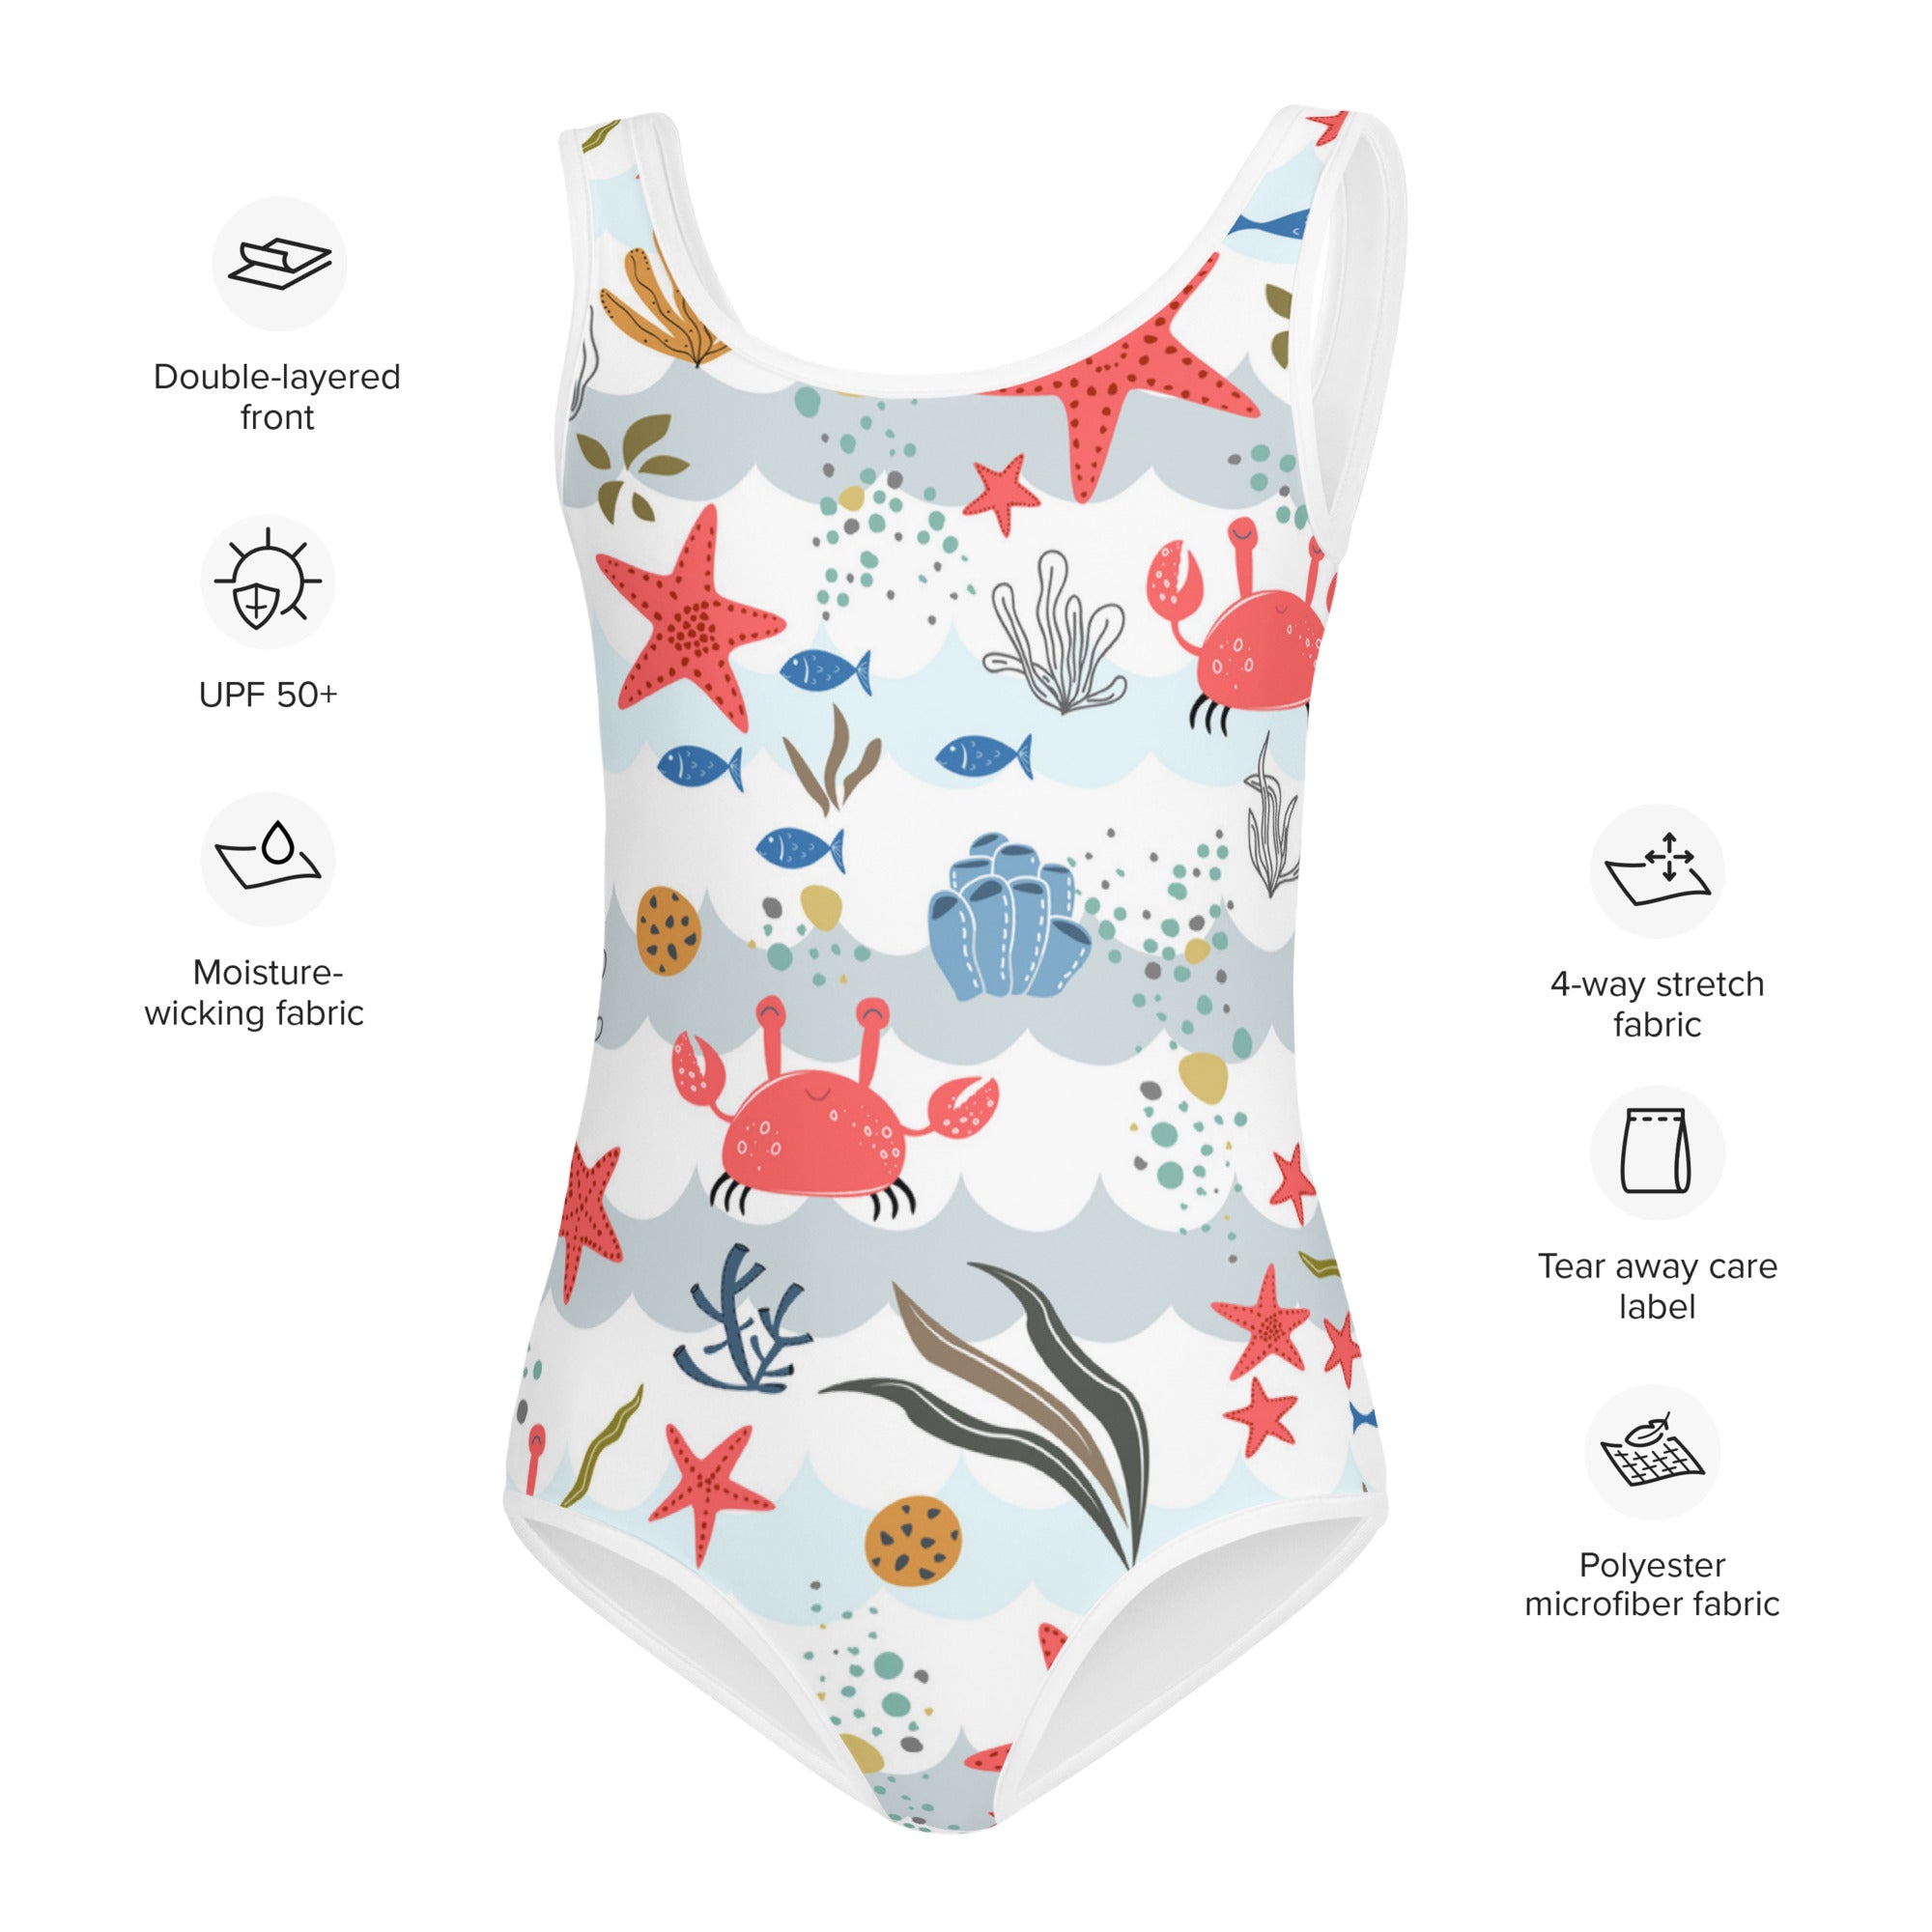 Kids' Printed One-Piece Swimsuit - Under the Sea